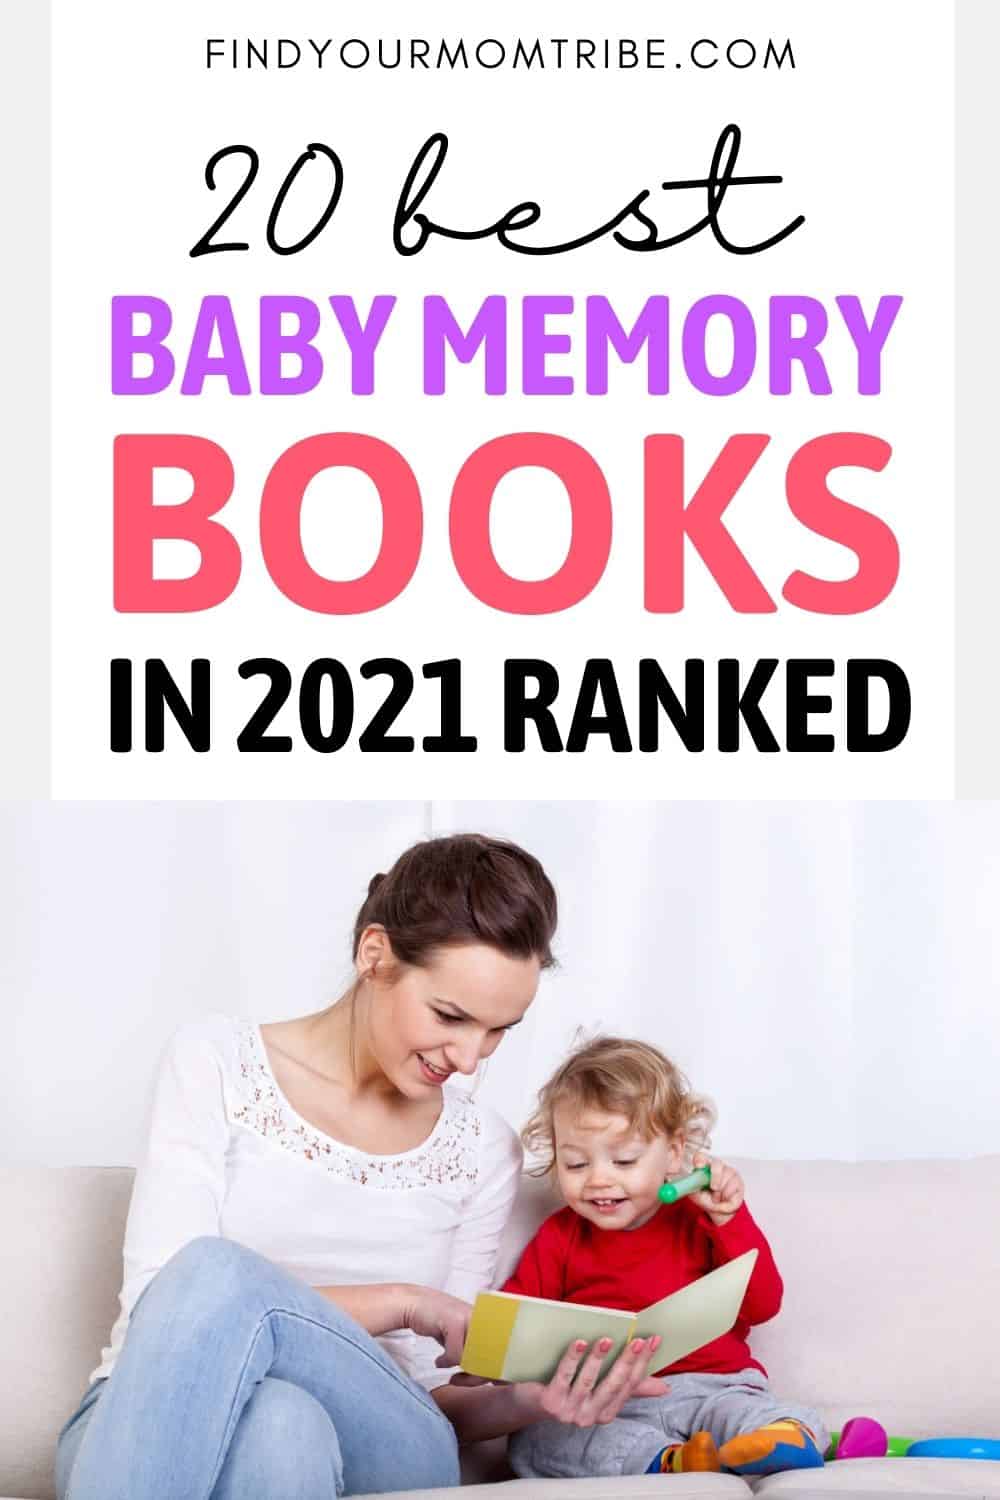 20 Best Baby Memory Books In 2021 Ranked